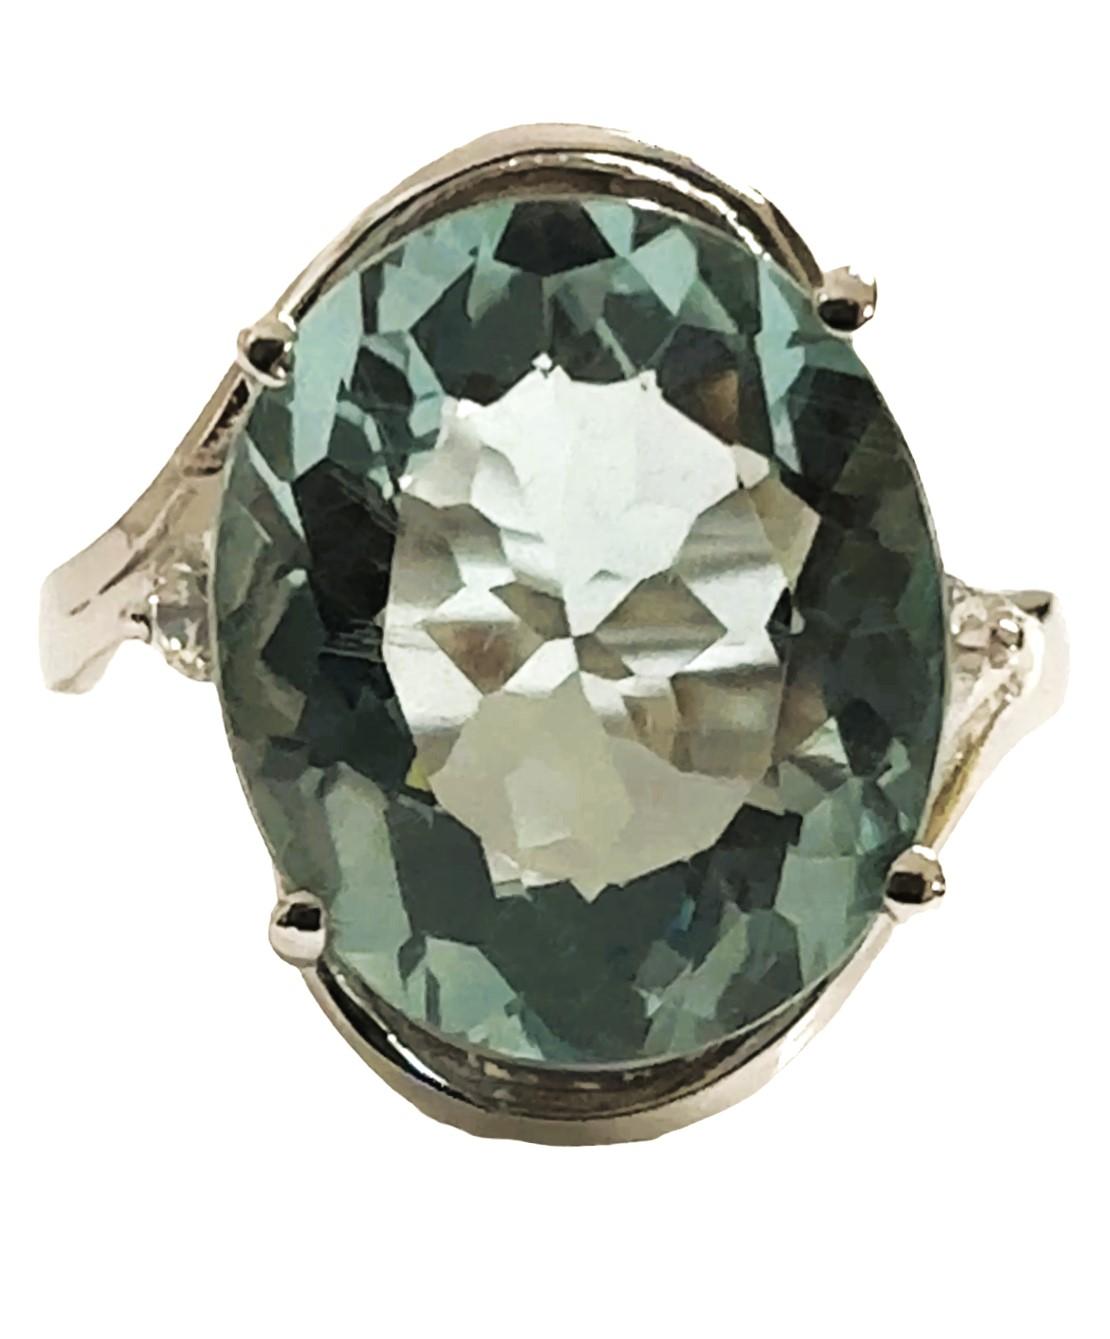 What a beautiful ring!  The ring is a size 6.25.  This stone is from the Philippines. It is a beautiful oval cut stone and is 4.70 cts.  It's a very high quality stone.  The 